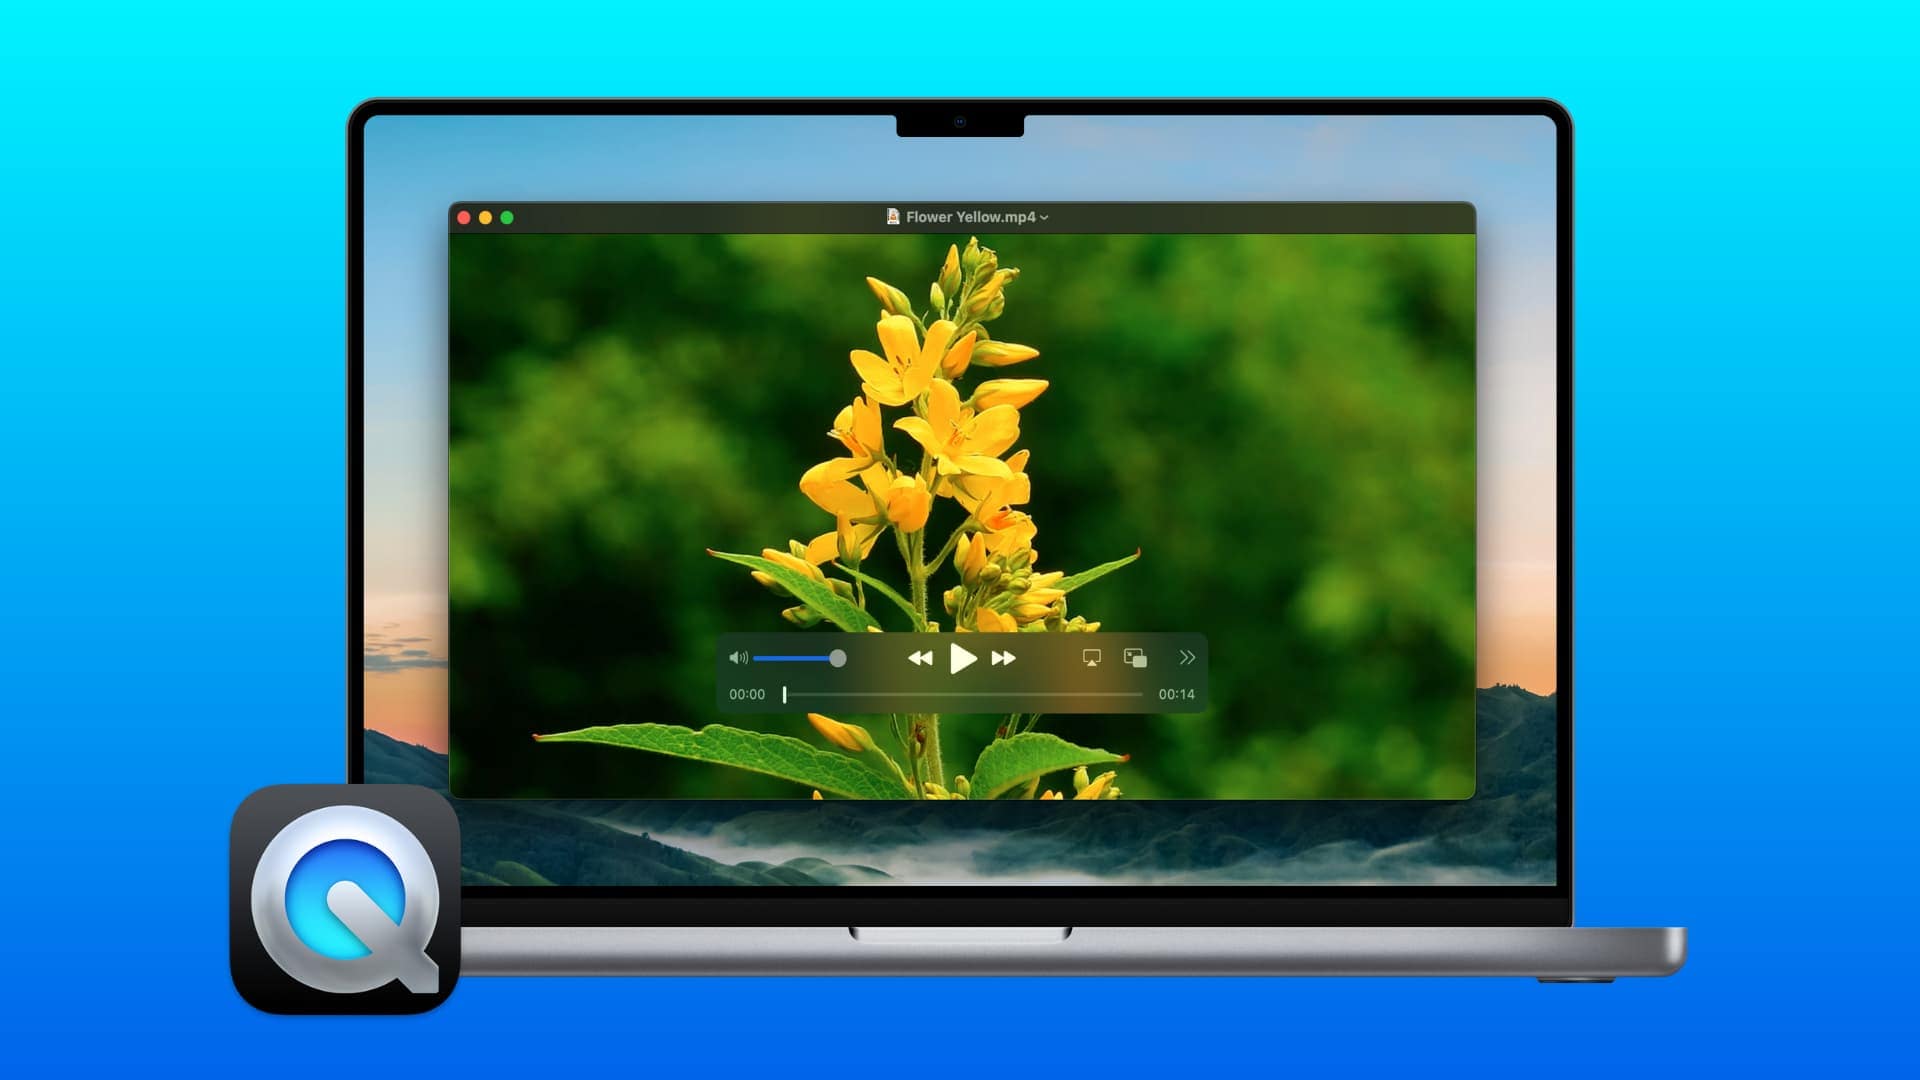 quicktime player audio recorder for mac